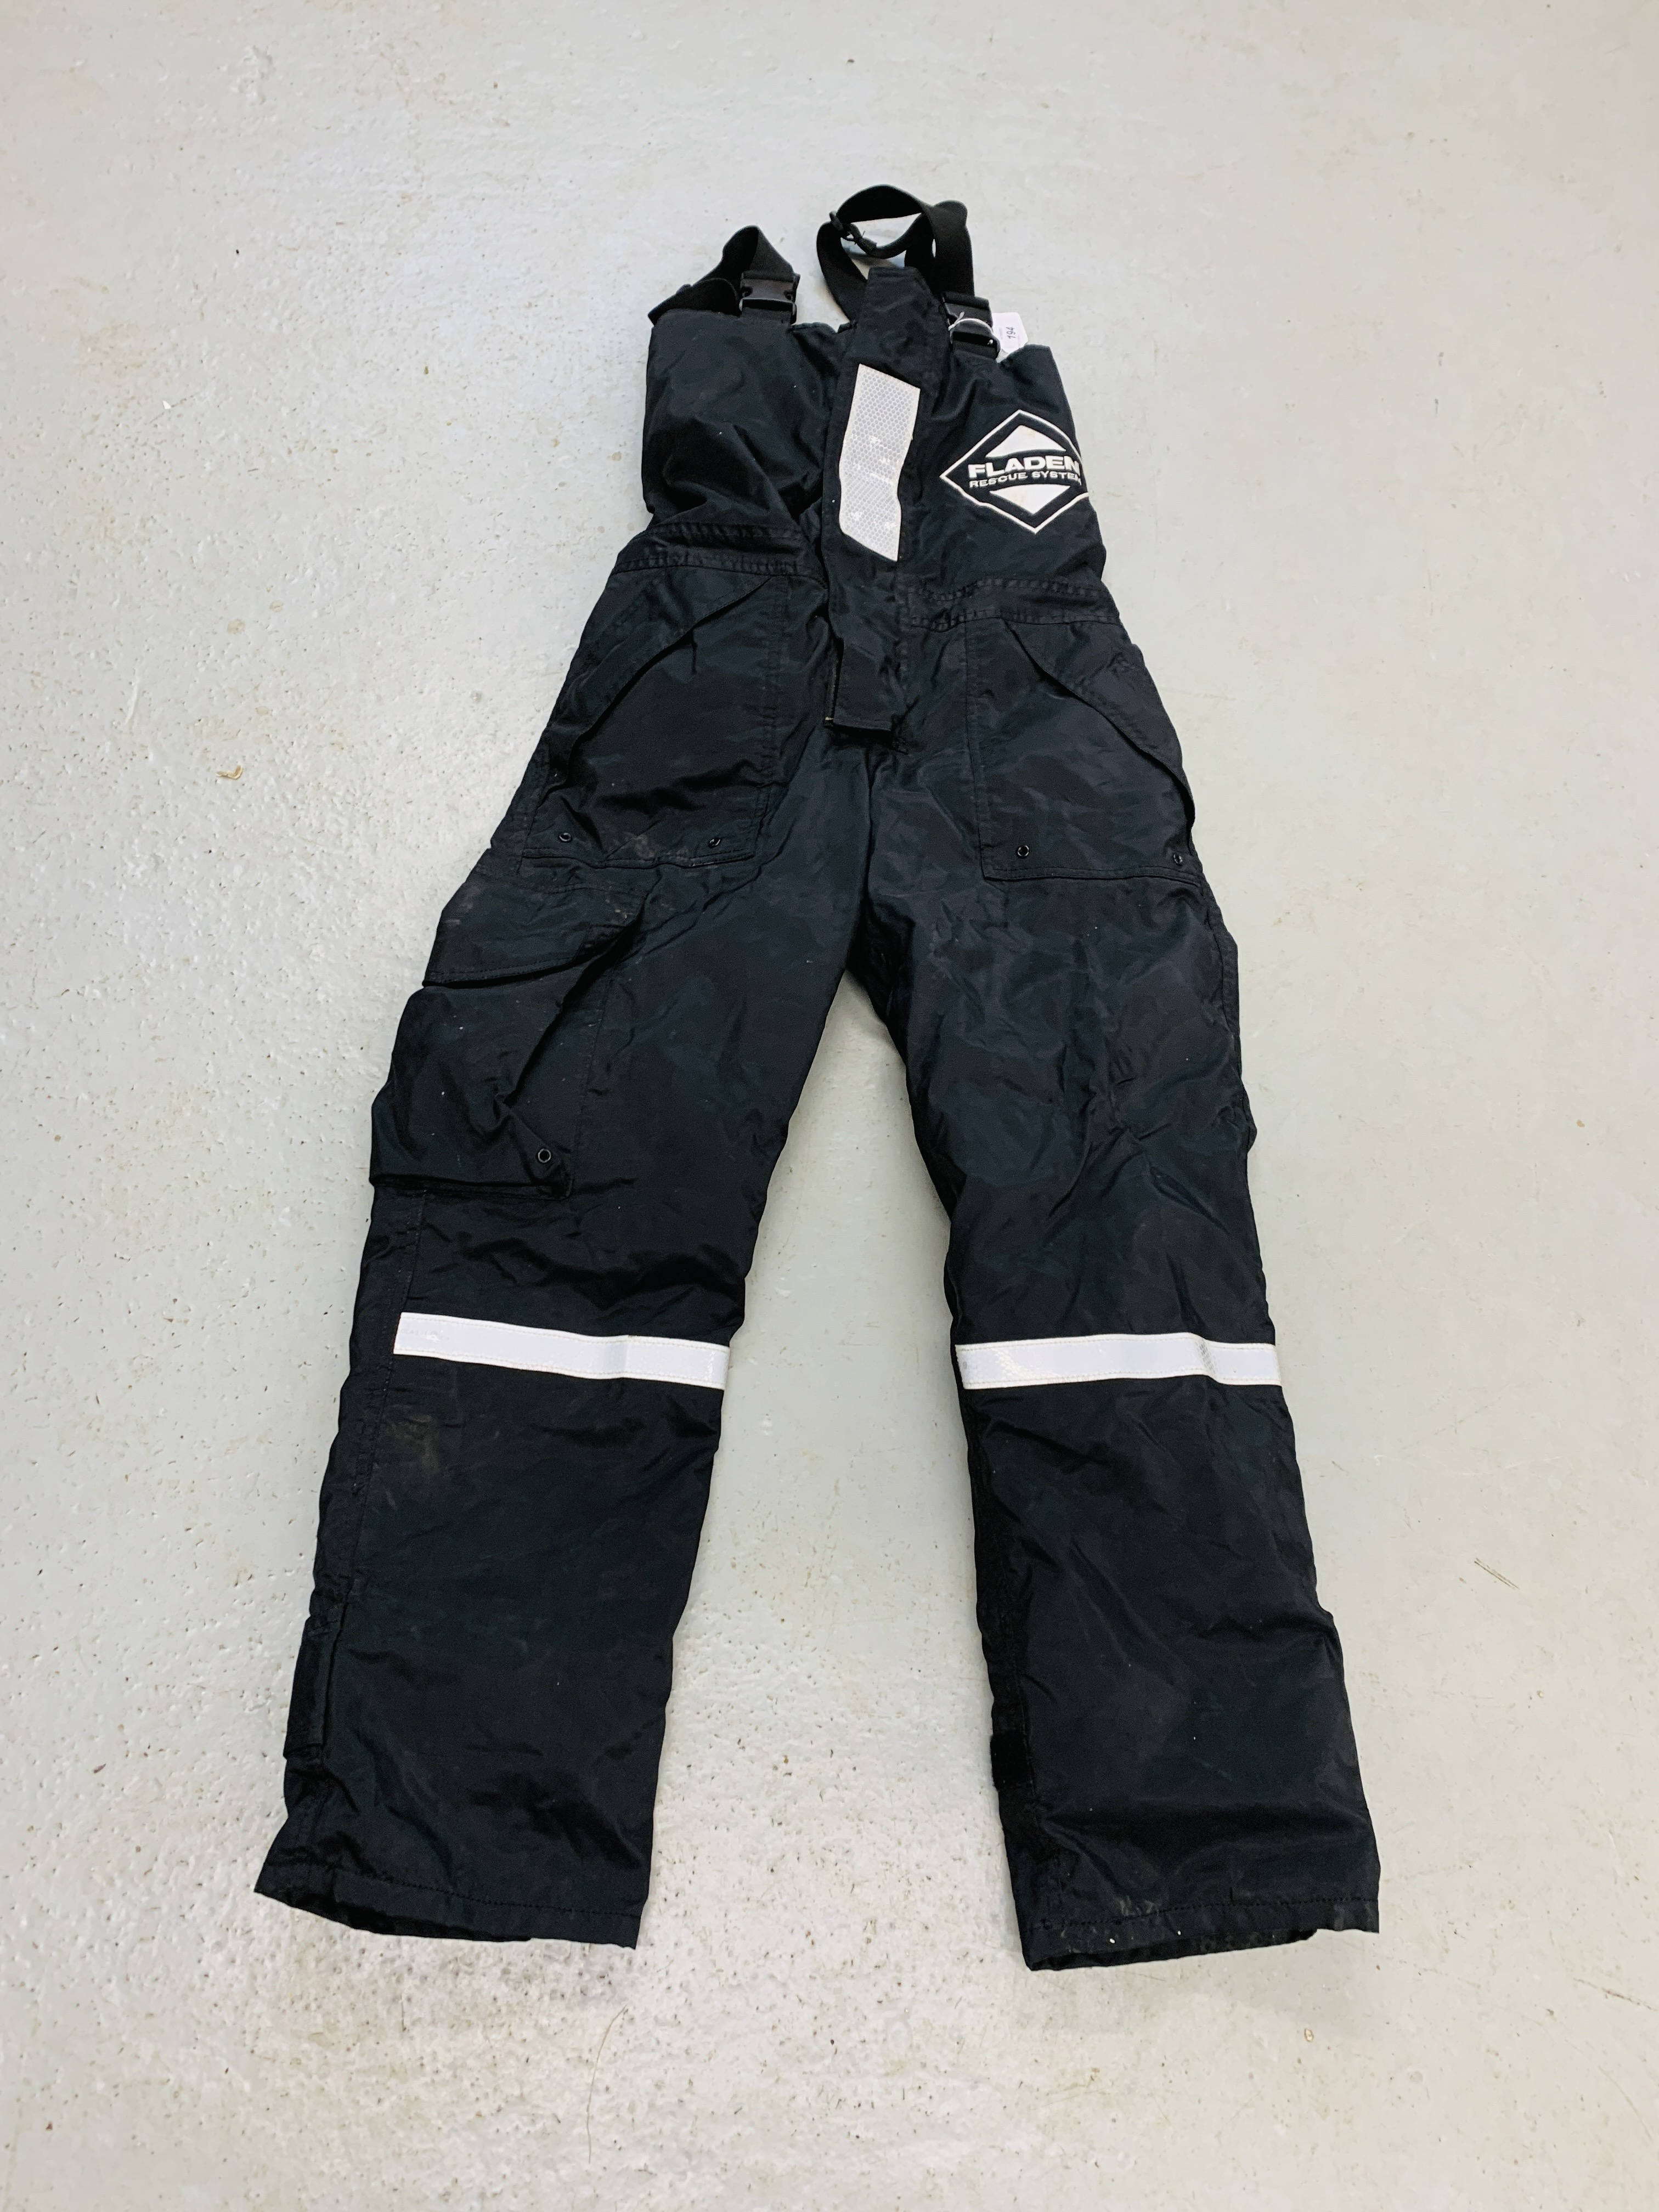 A PAIR OF FLADEN RESCUE SYSTEM BIB AND BRACE TROUSERS SIZE SMALL